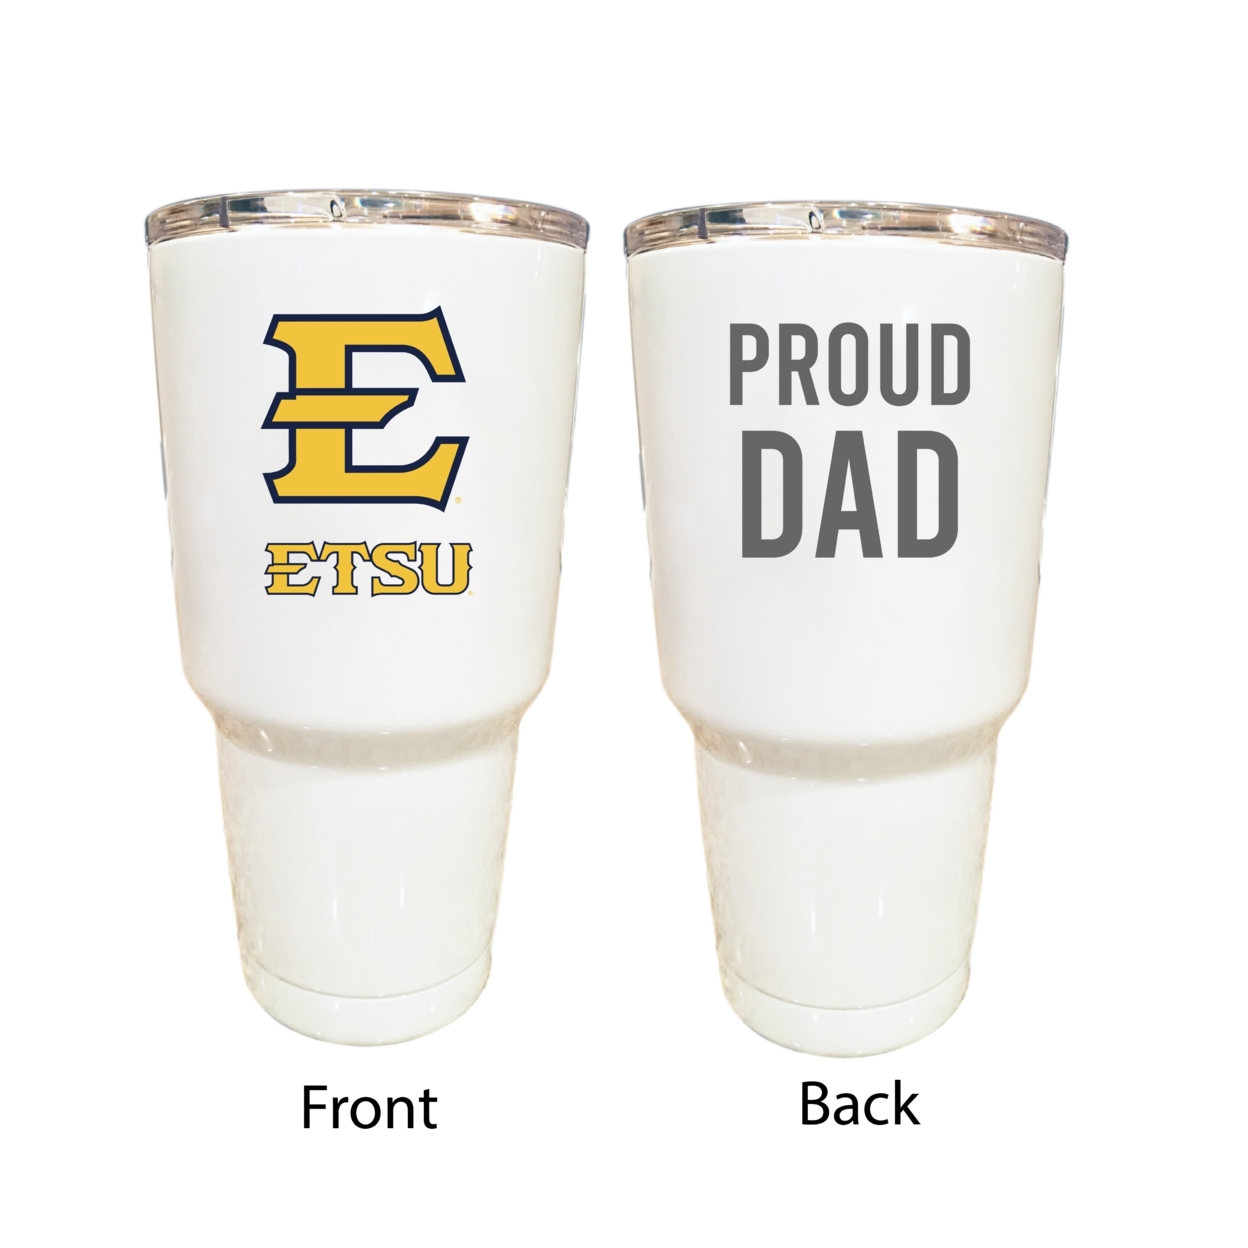 East Tennessee State University Proud Dad 24 Oz Insulated Stainless Steel Tumblers Choose Your Color.